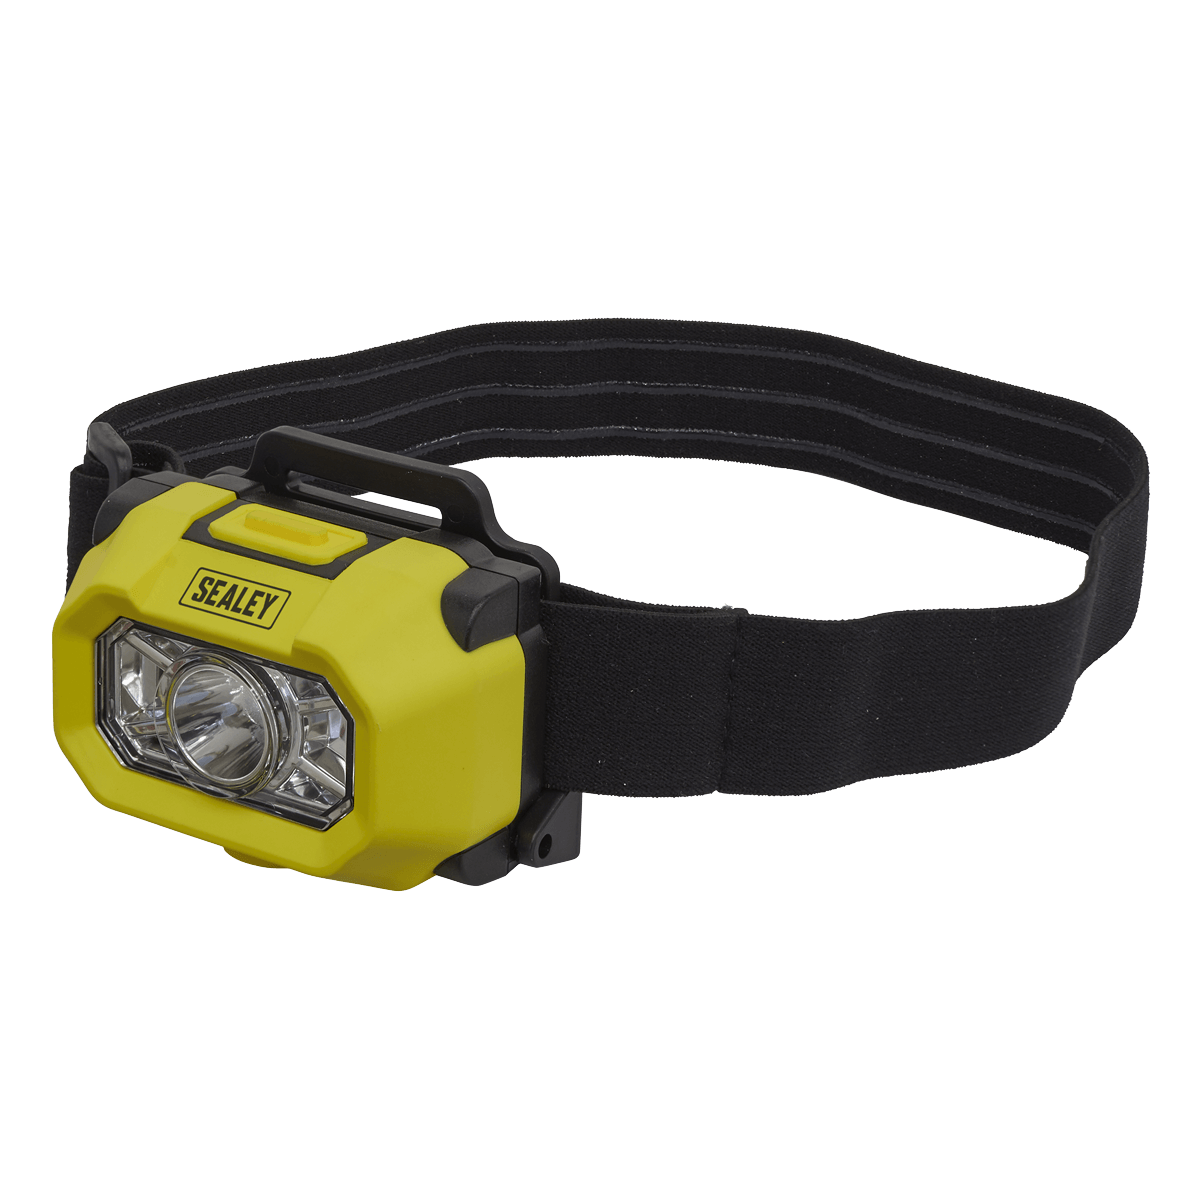 Head Torch XP-G2 CREE LED Intrinsically Safe ATEX/IECEx Approved | Single high power XP-G2 CREE LED produces extremely bright, white light with an output of 216/100 lumens (high/low) and a working range up to 100/75 metres. | toolforce.ie